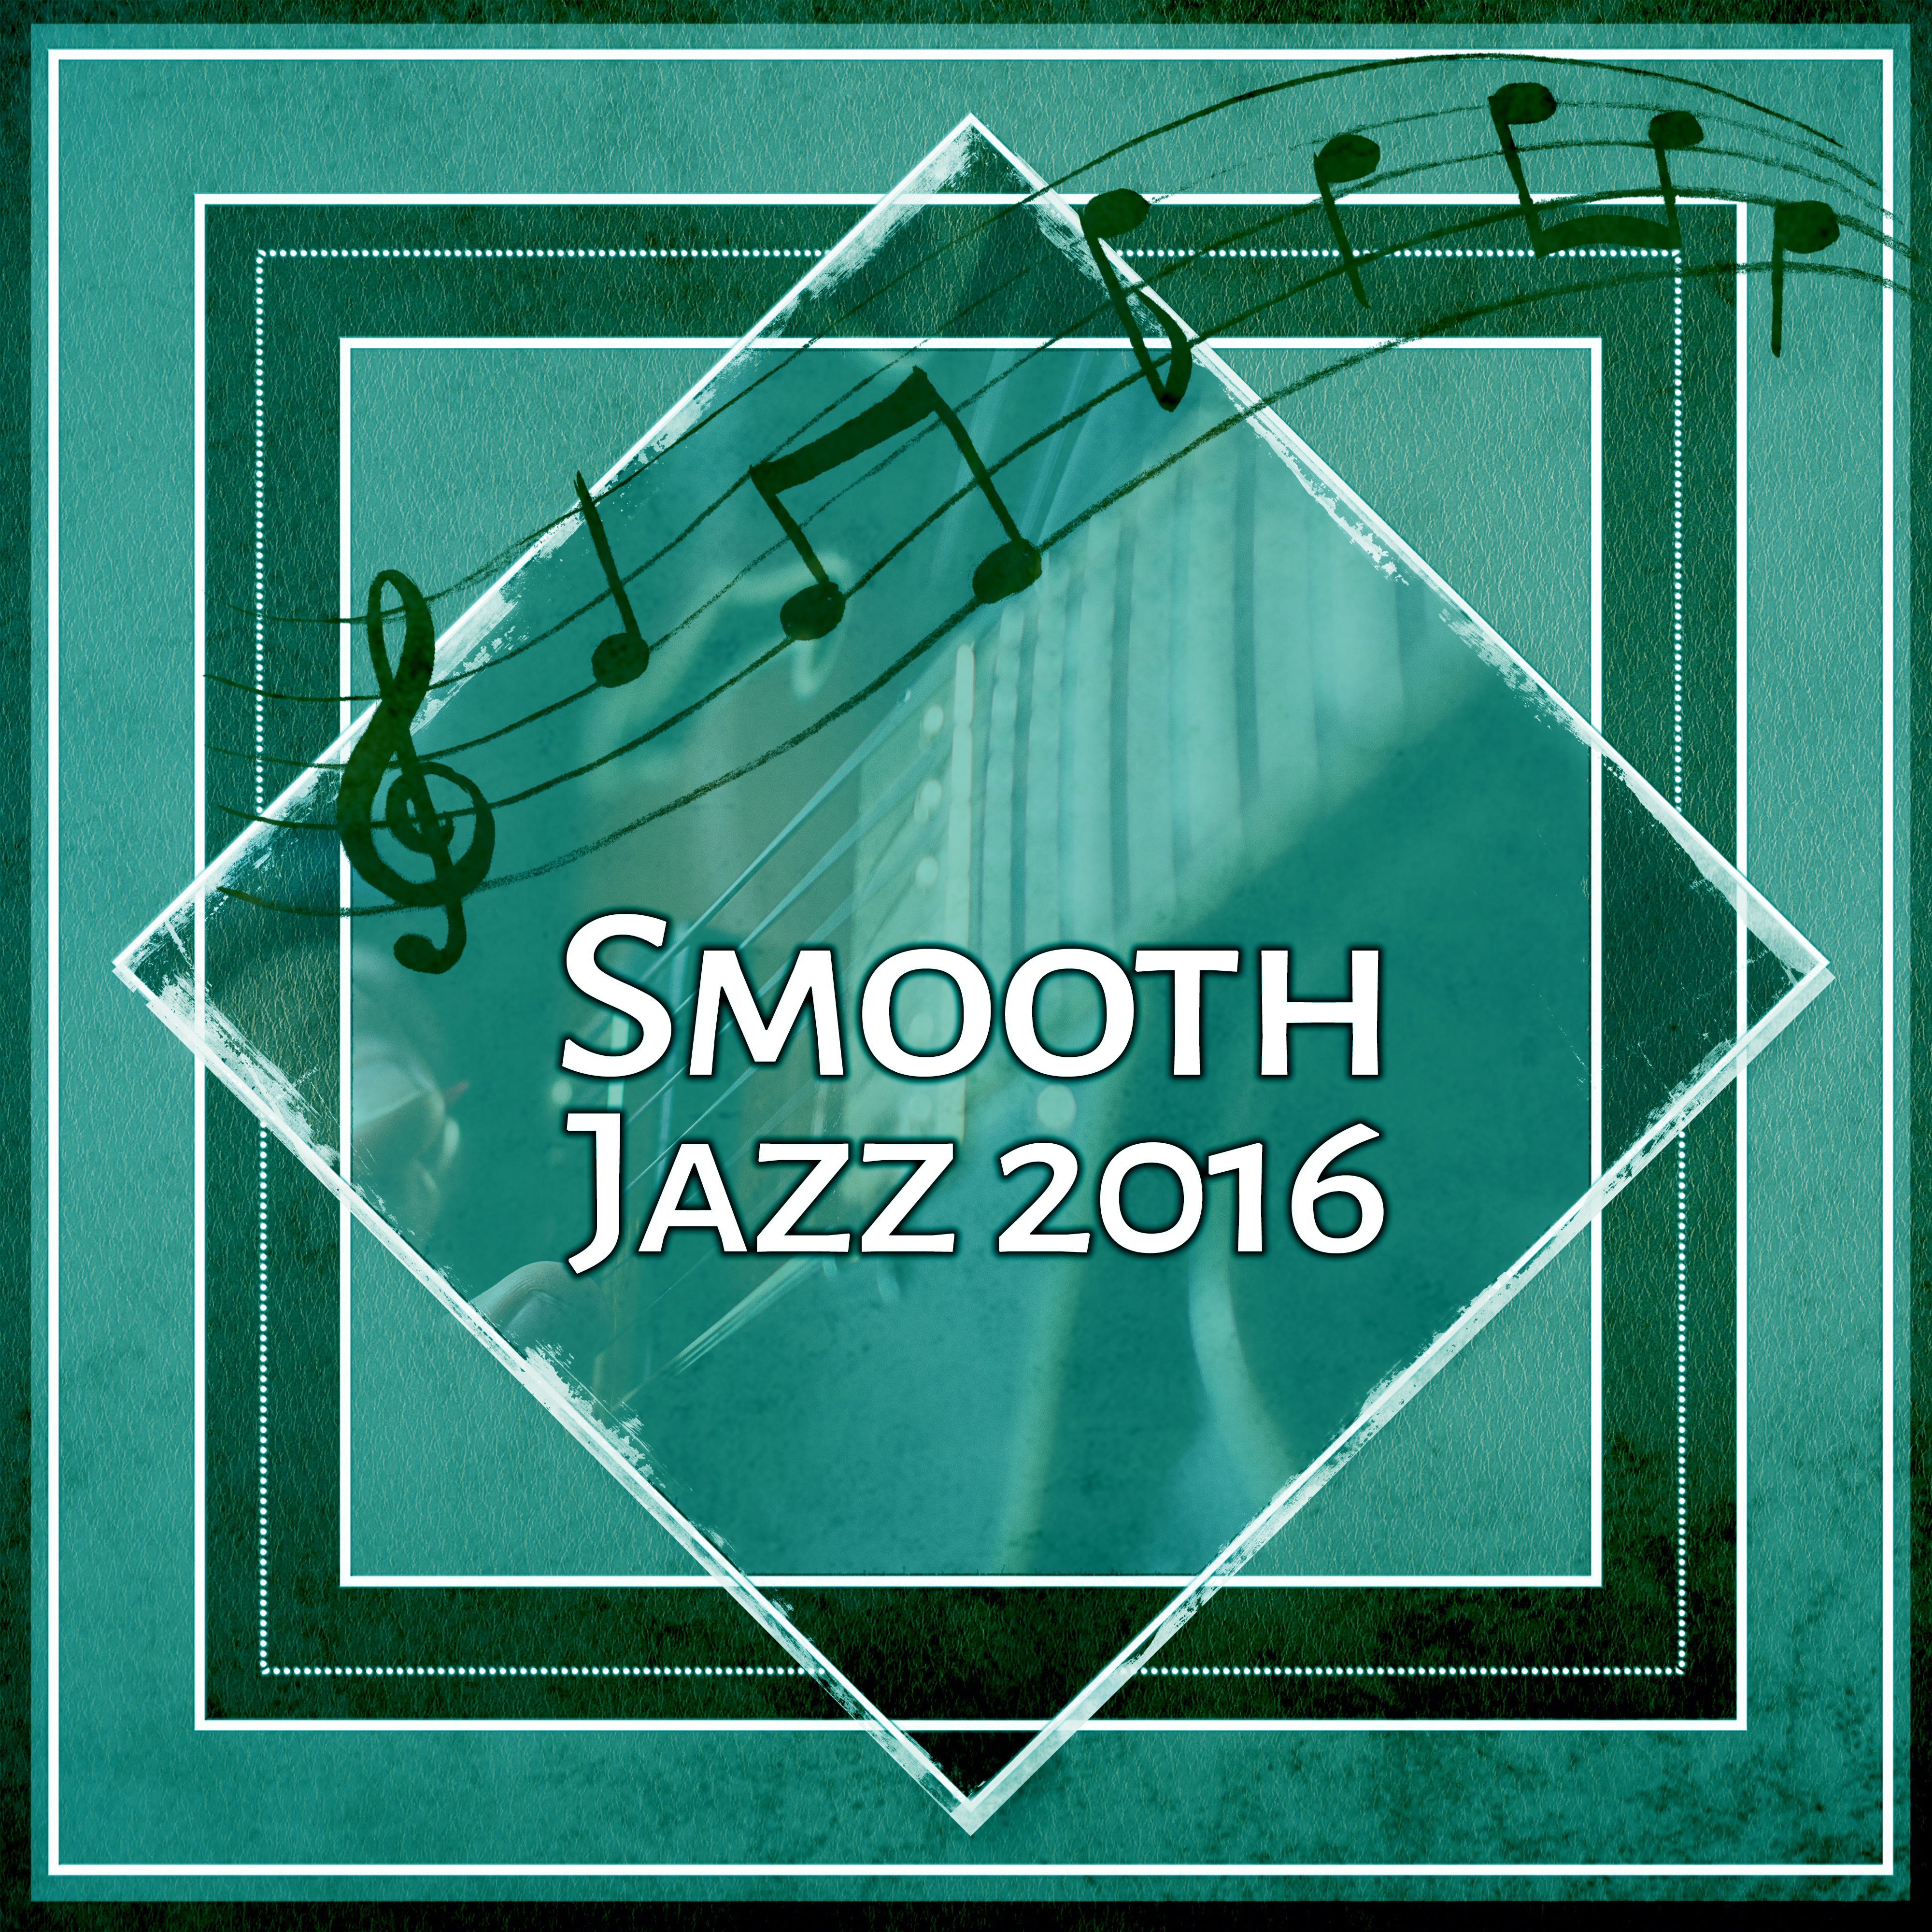 Smooth Jazz 2016 – Most Smooth Jazz Music, Piano Bar Jazz Lounge, Sentimental Mood, Dinner Party Time, Jazz Lounge